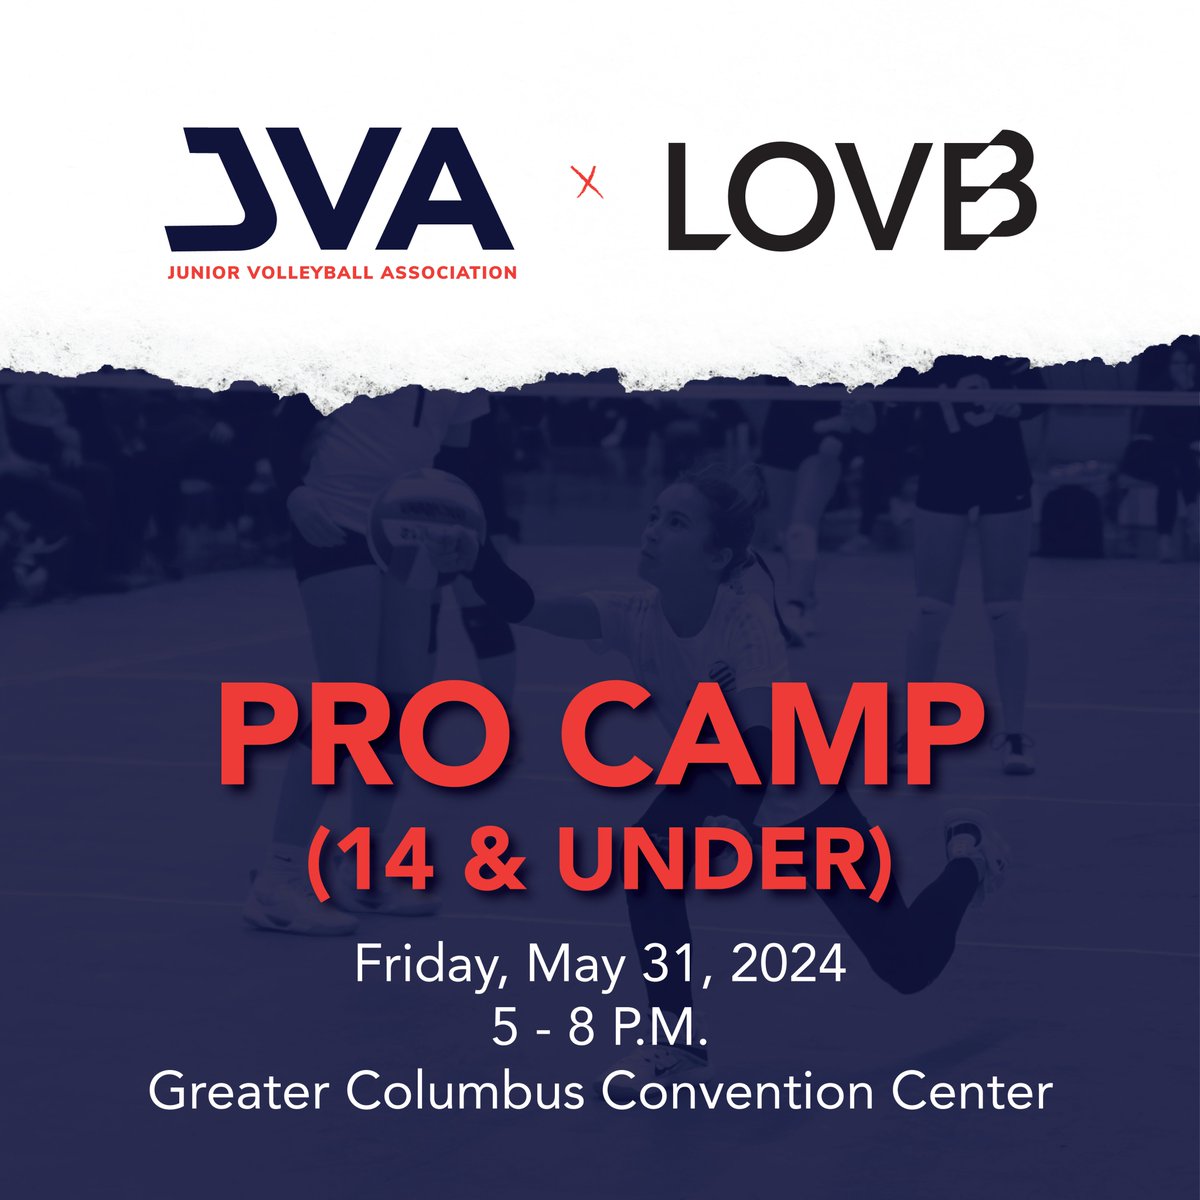 𝗪𝐡𝐚𝐭 𝐭𝐨 𝐄𝐱𝐩𝐞𝐜𝐭 𝐚𝐭 𝐭𝐡𝐞 𝐋𝐎𝐕𝐁 𝐏𝐫𝐨 𝐂𝐚𝐦𝐩: 
This Volleyball Pro Camp is open to athletes ages 5-14 and is Coed.  Pro VB Autograph session included!  

@LeagueOneVB 

REGISTER NOW: lovb.sprocketsports.com/club/procamp 

#volleyball #professionalvolleyball #volleyballclub